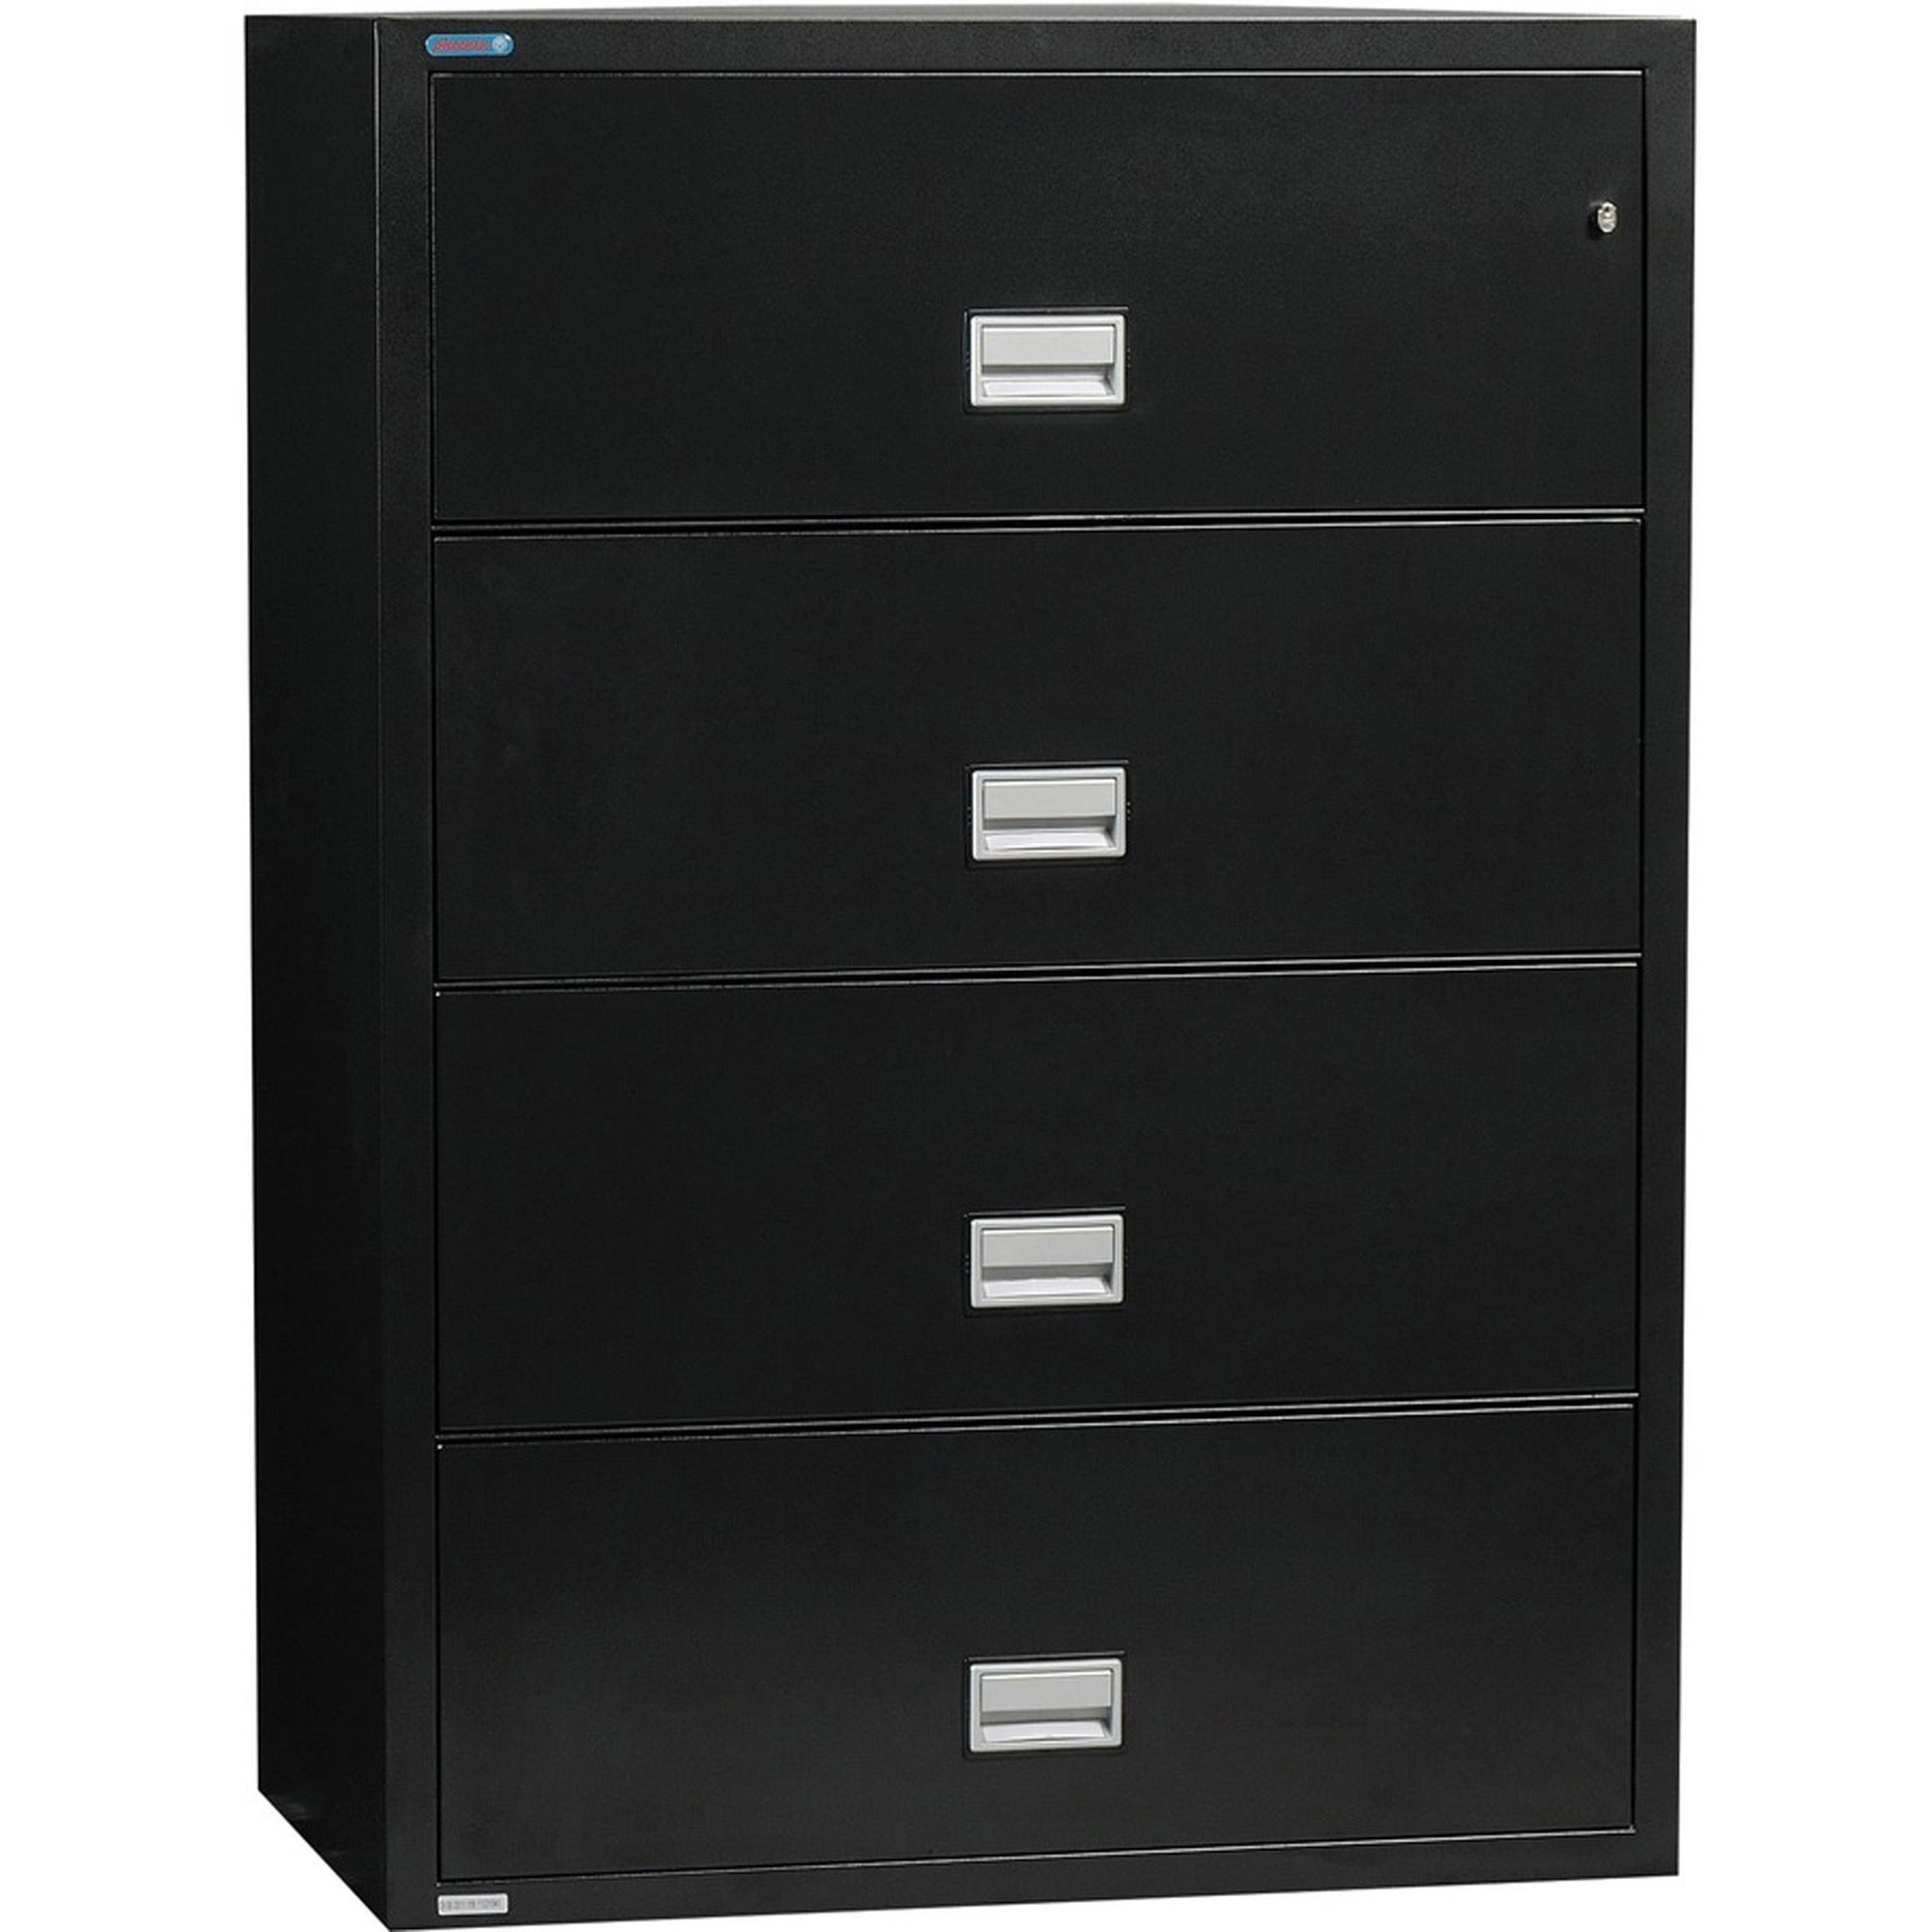 phoenix-world-class-lateral-file-4-drawer-389-x-236-x-547-4-x-drawers-for-file-lateral-fire-resistant-explosion-resistant-impact-resistant-security-lock-black_pxslat4w38b - 1